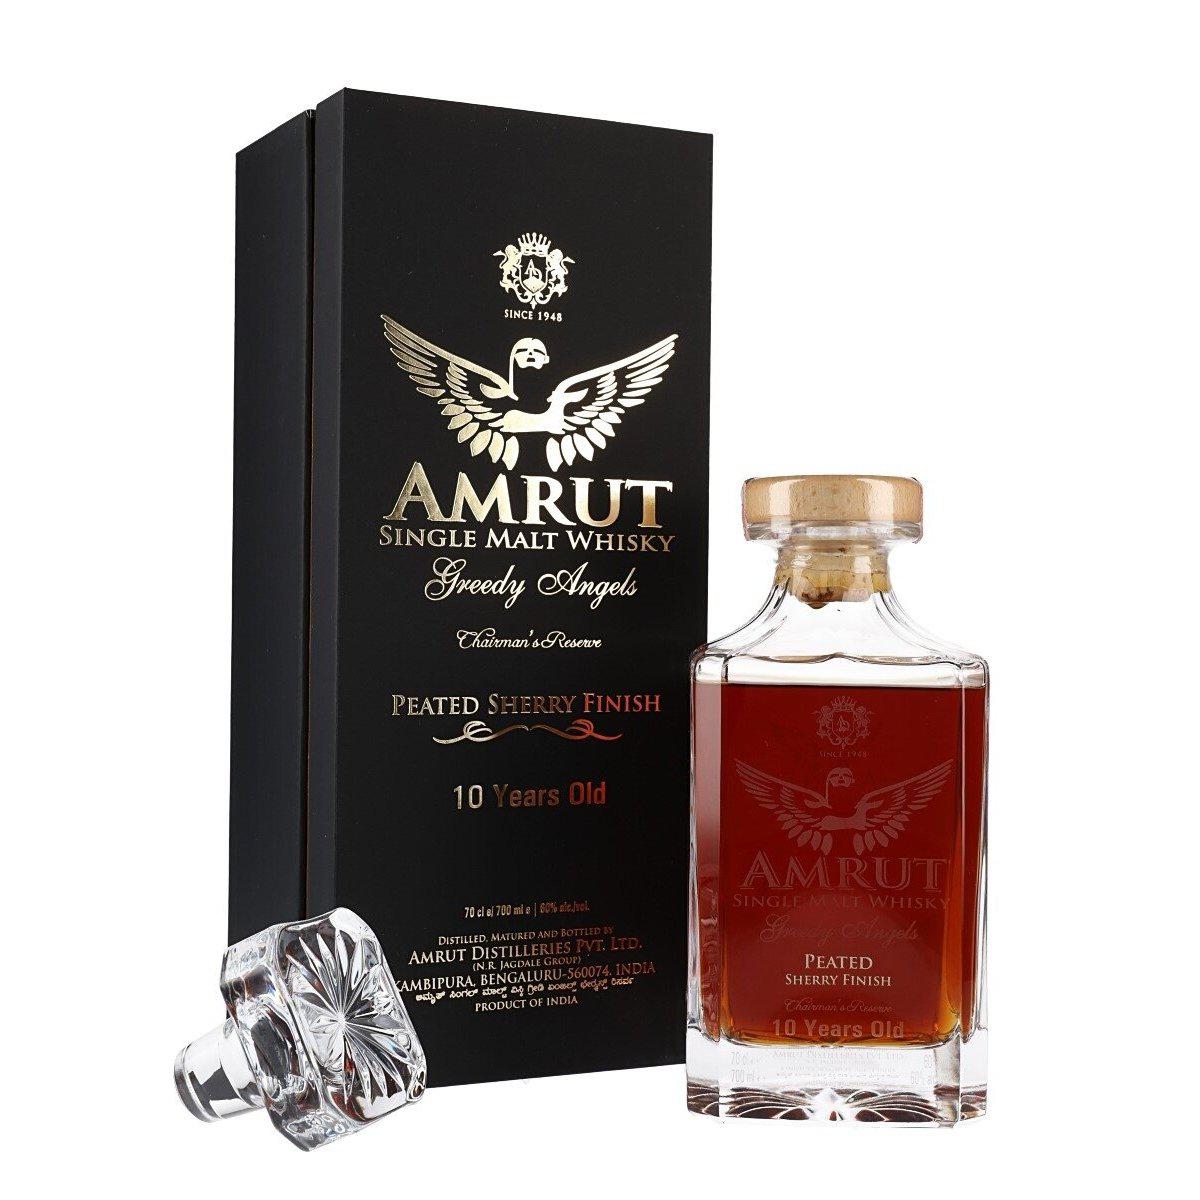 Amrut Greedy Angels Chairmans Reserve Peated Sherry Finish 10 Year Old Cask Strength Single Malt Indian Whisky 700ml